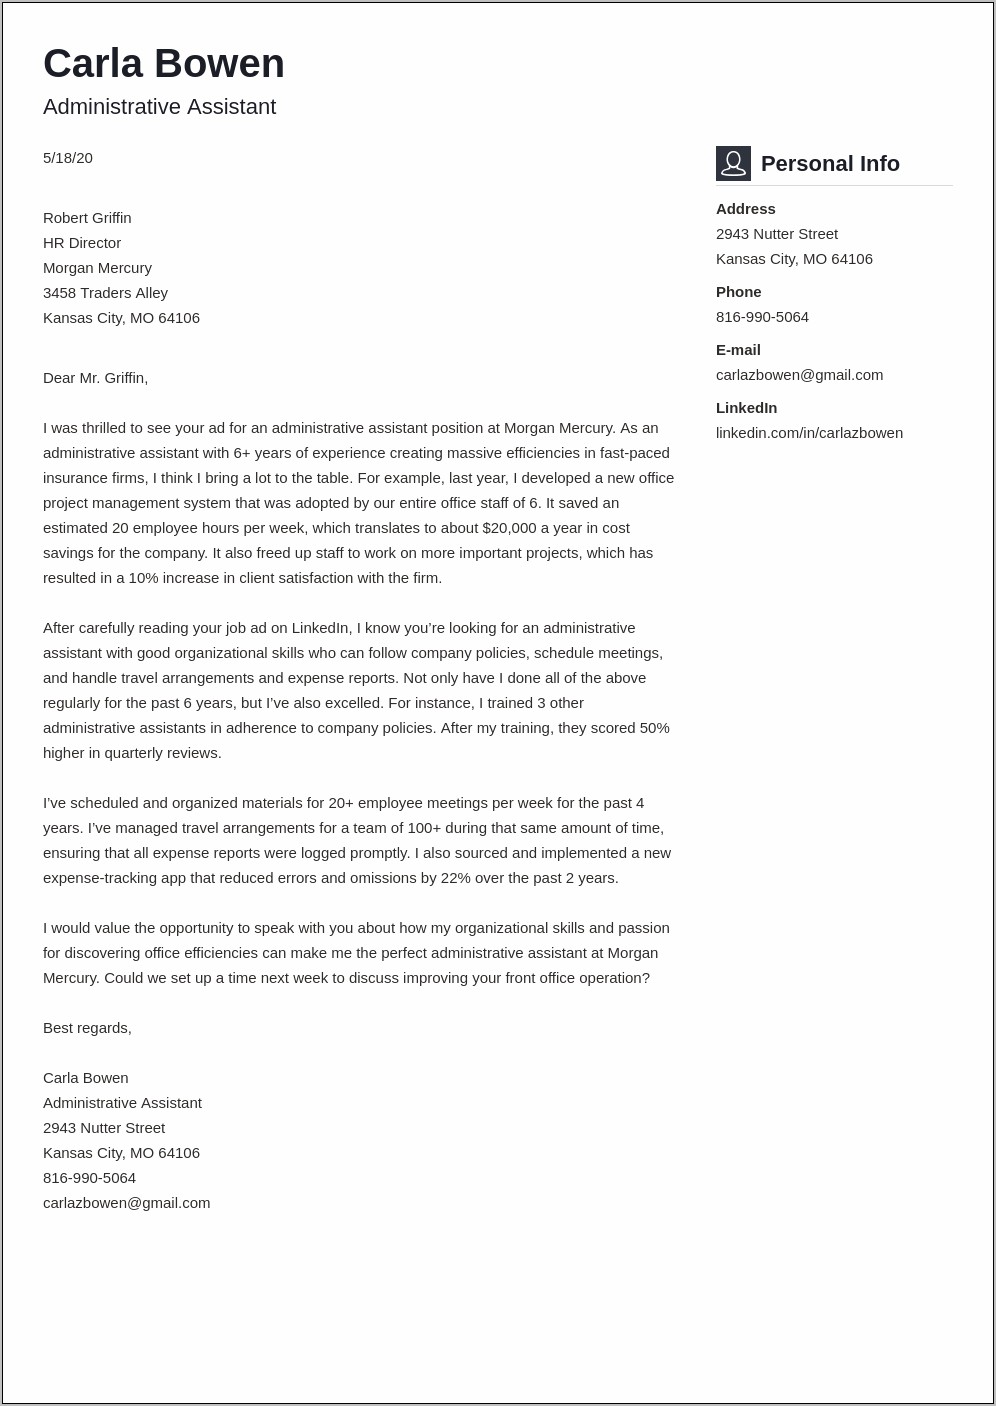 Resume Cover Letter Samples For Executive Assistant